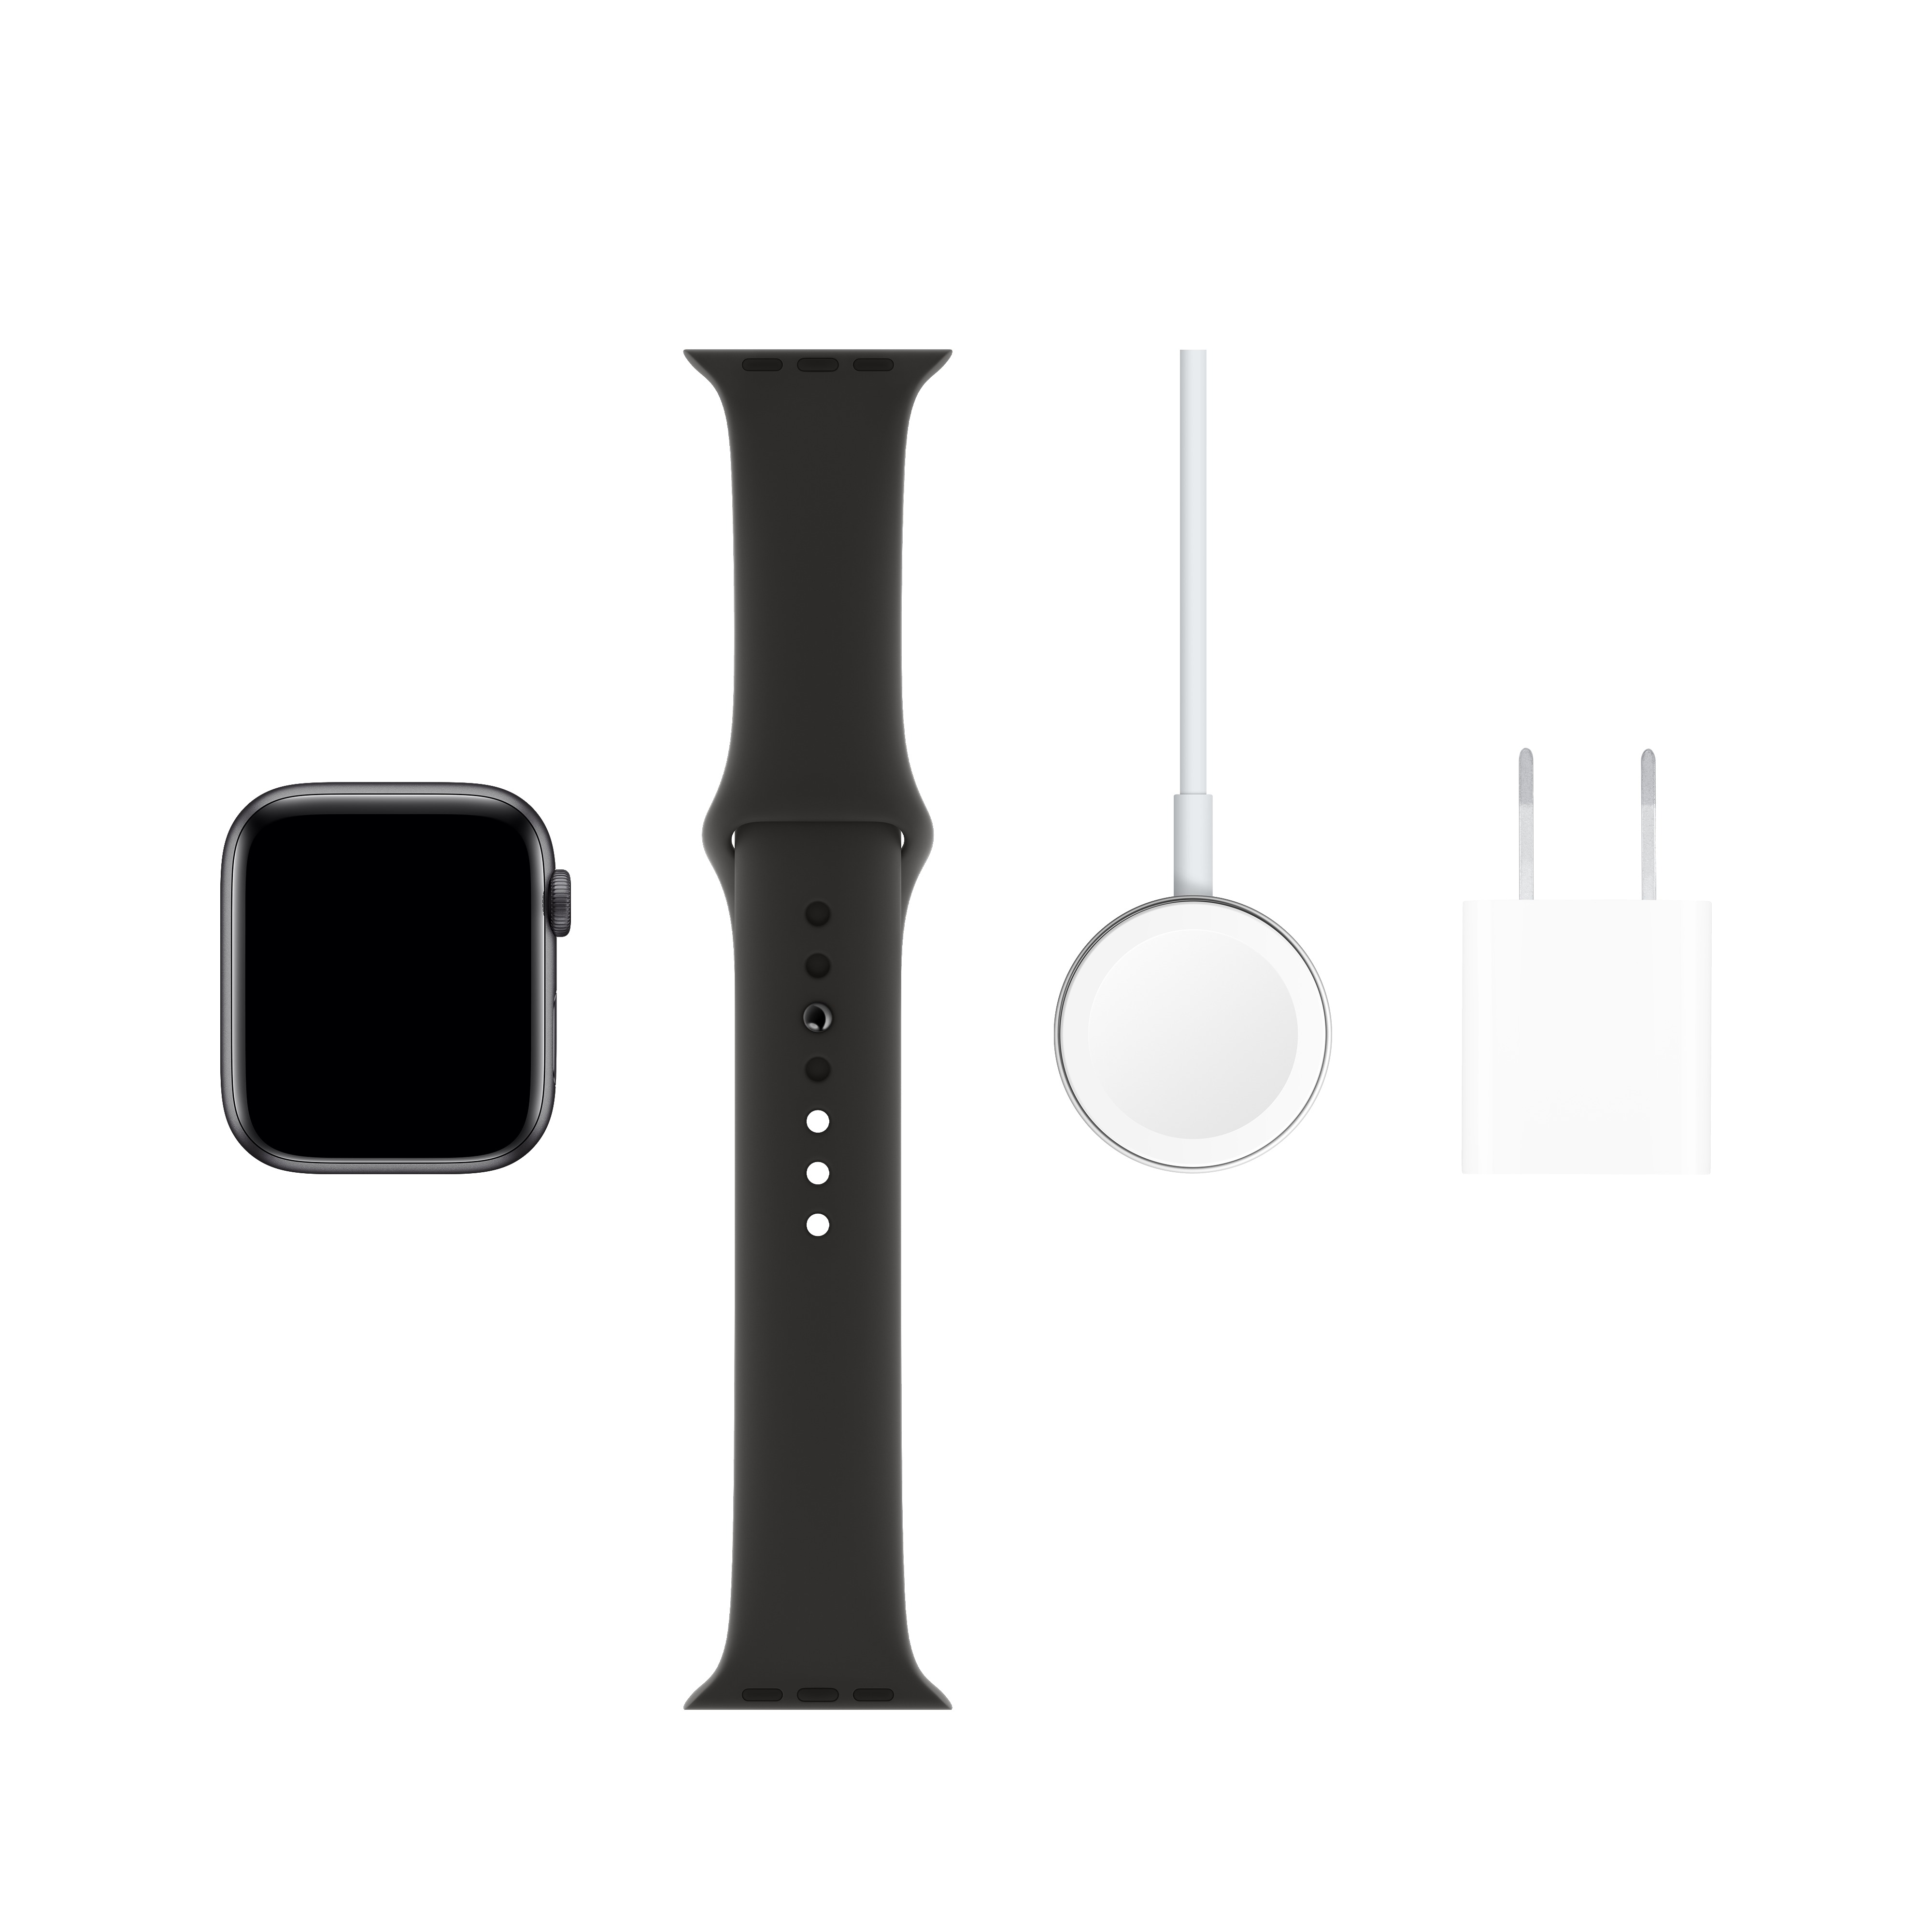 Apple Watch Series 5 GPS, 44mm Space Gray Aluminum Case with Black Sport Band - S/M & M/L - image 5 of 6